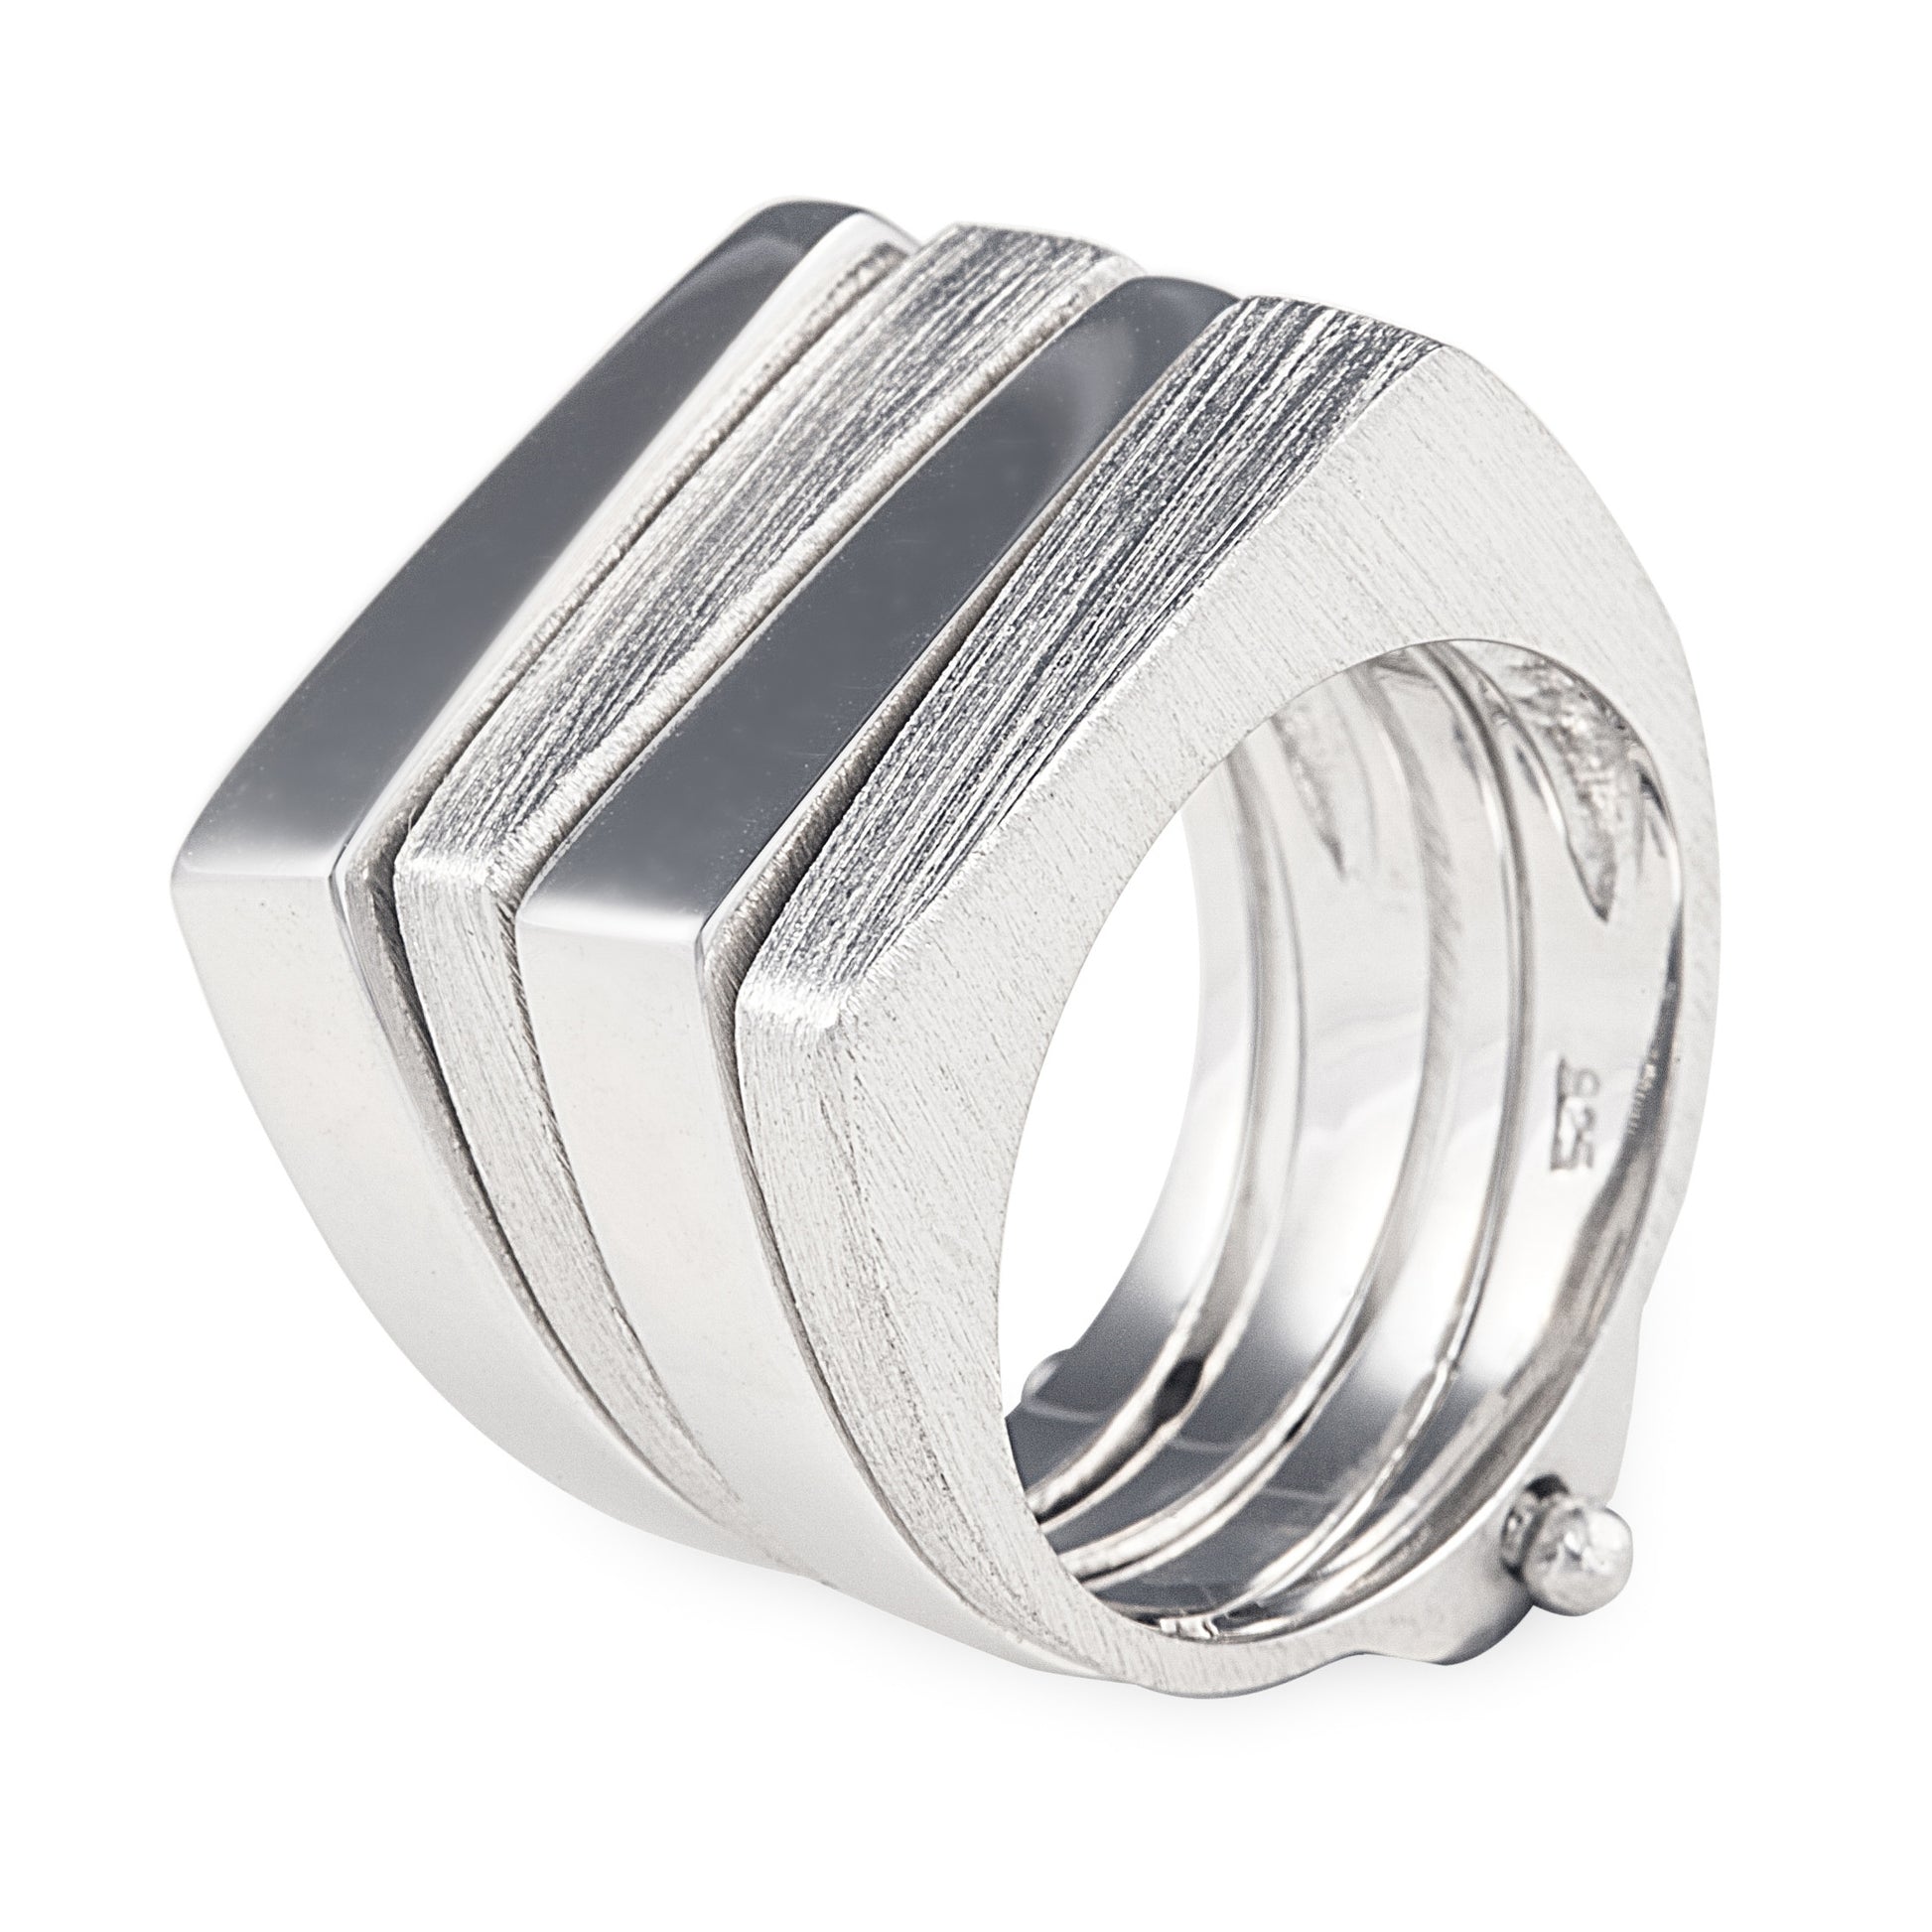 Joined stack of 925 Sterling Silver rings. Two rings are polished and two are brushed to give texture and contrast. Worldwide shipping.